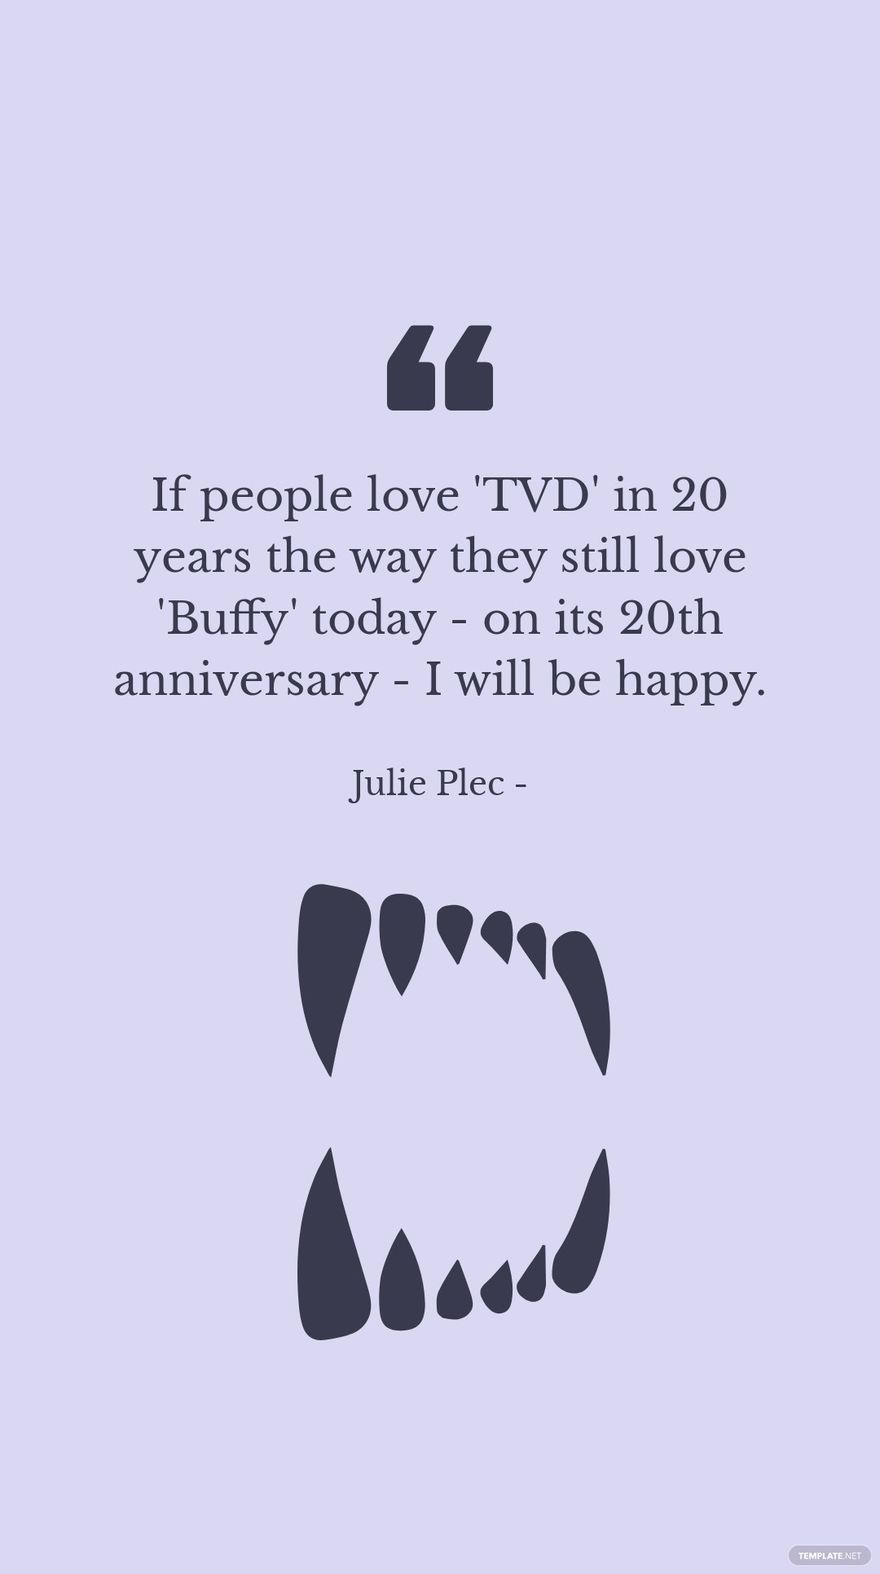 Free Julie Plec - If people love 'TVD' in 20 years the way they still love 'Buffy' today - on its 20th anniversary - I will be happy. in JPG